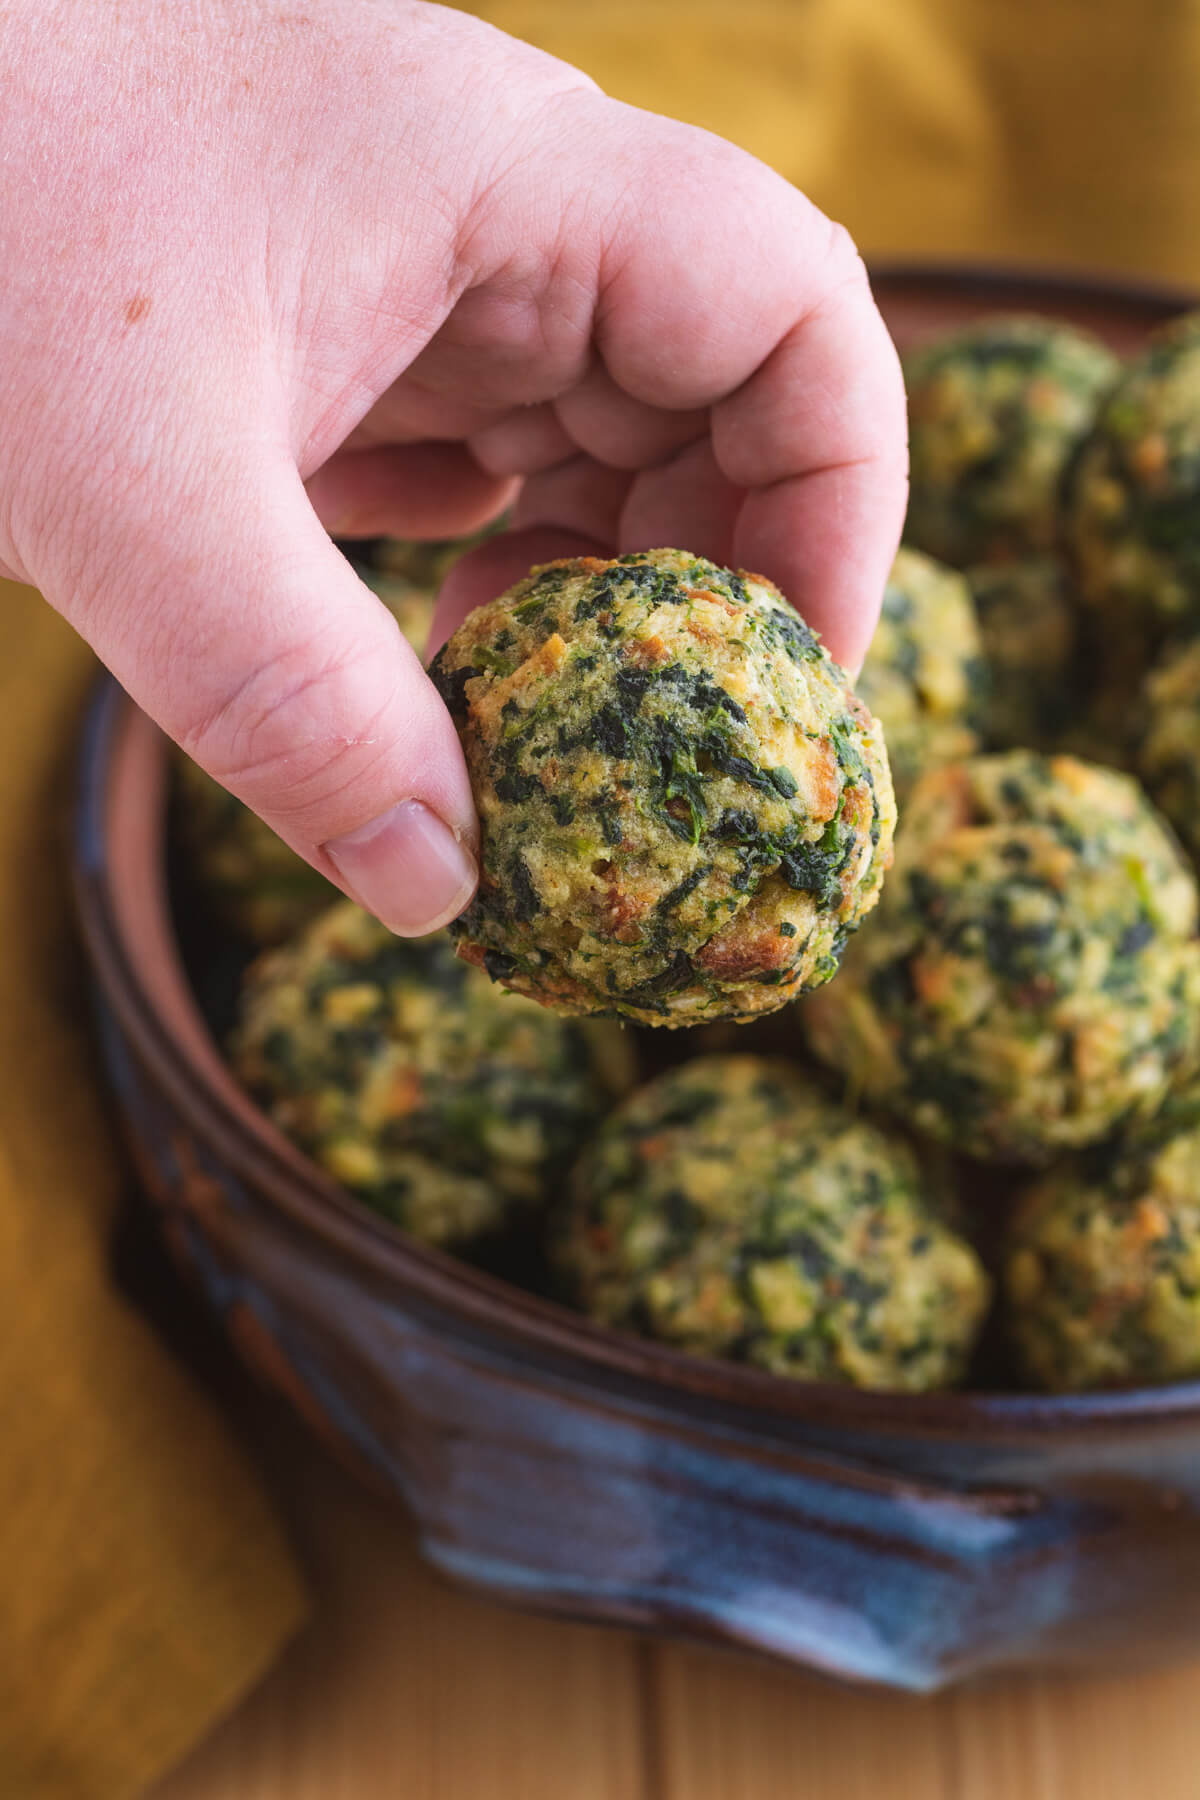 A hand grabbing a spinach stuffing ball out of a casserole dish.